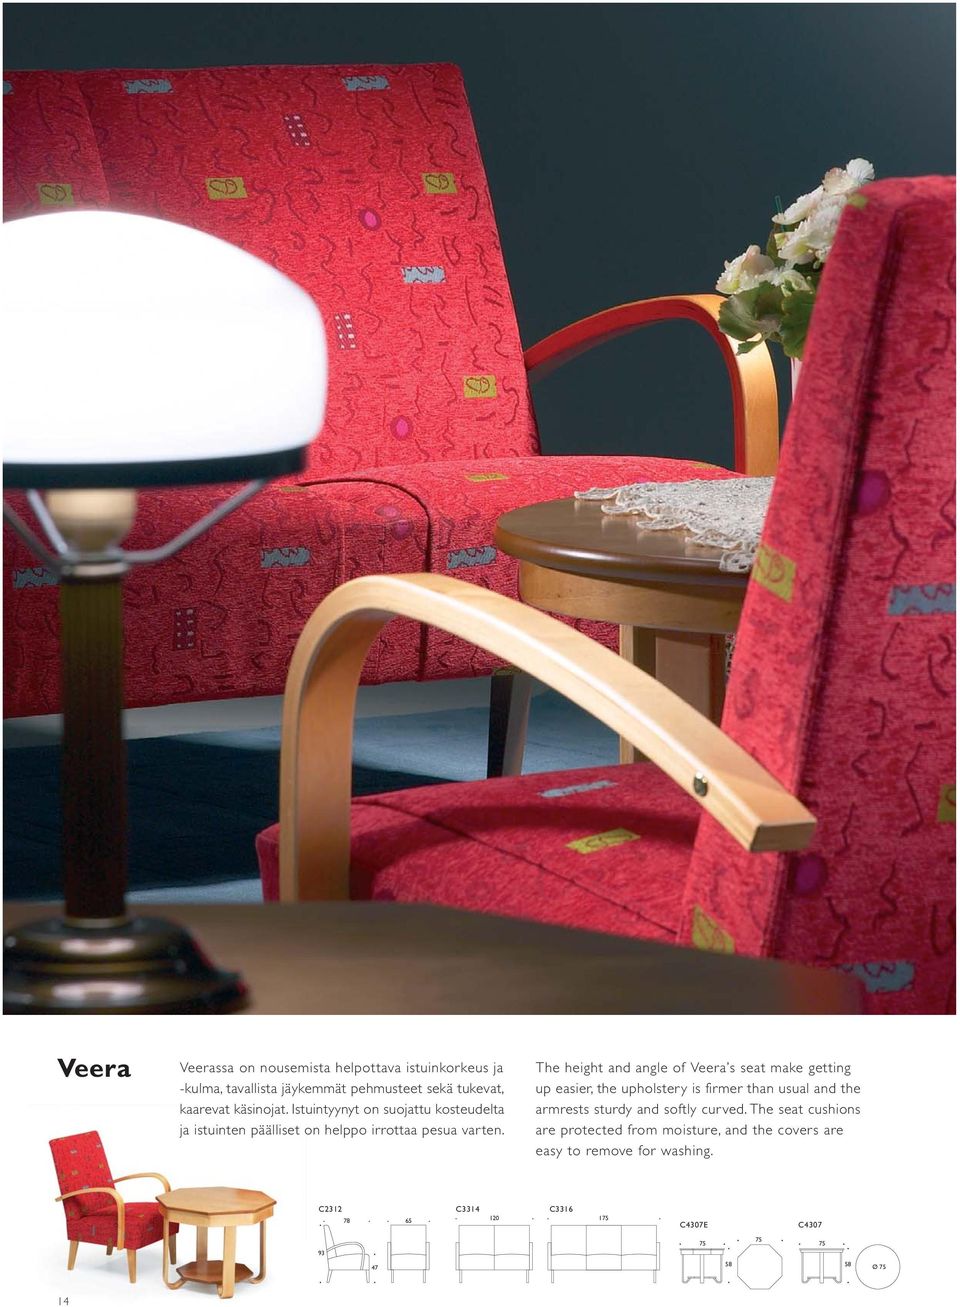 The height and angle of Veera s seat make getting up easier, the upholstery is firmer than usual and the armrests sturdy and softly